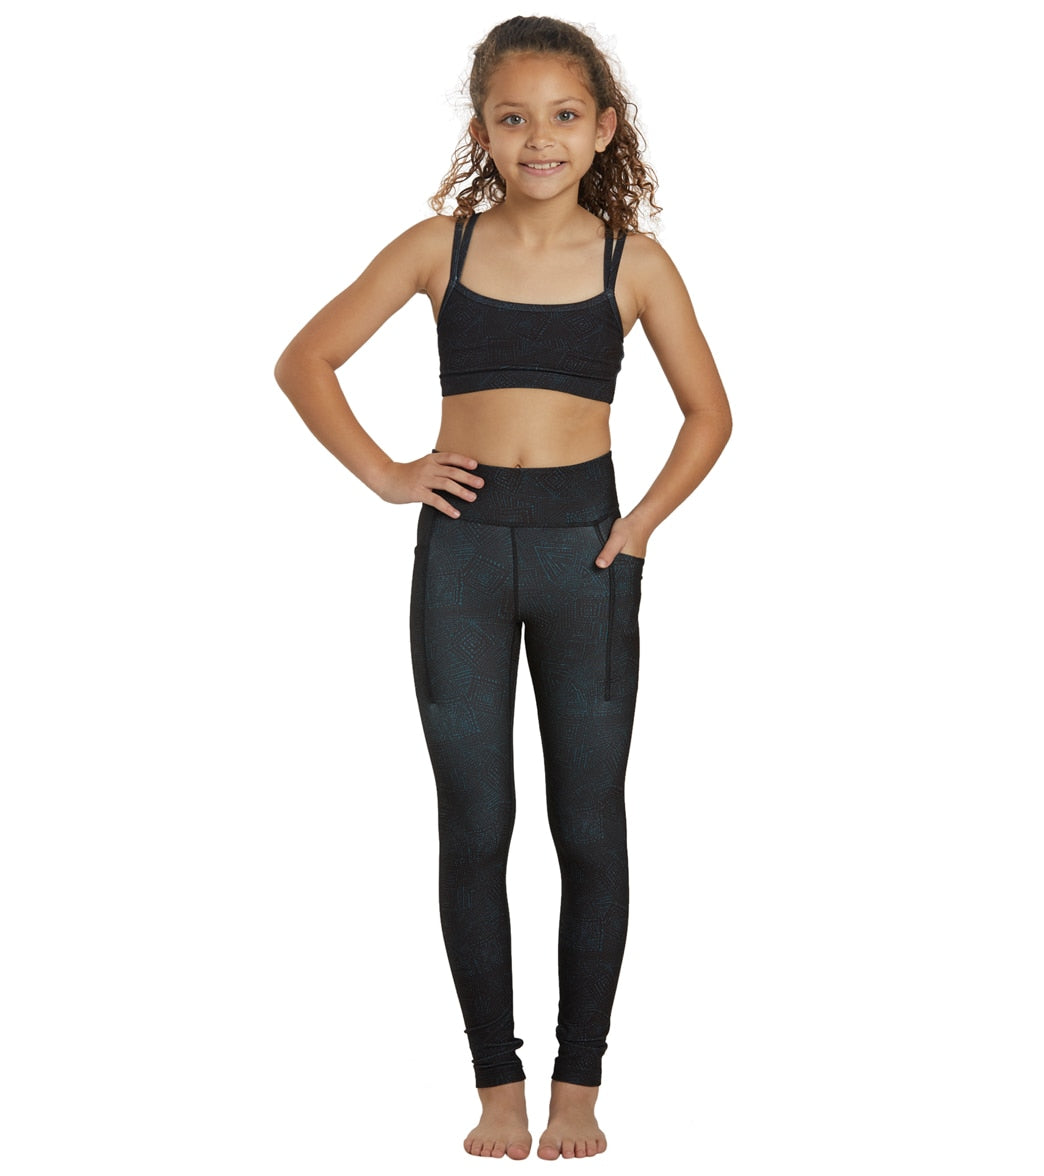 4 Brands Offering Trendy Yoga Clothes for Kids + Teens